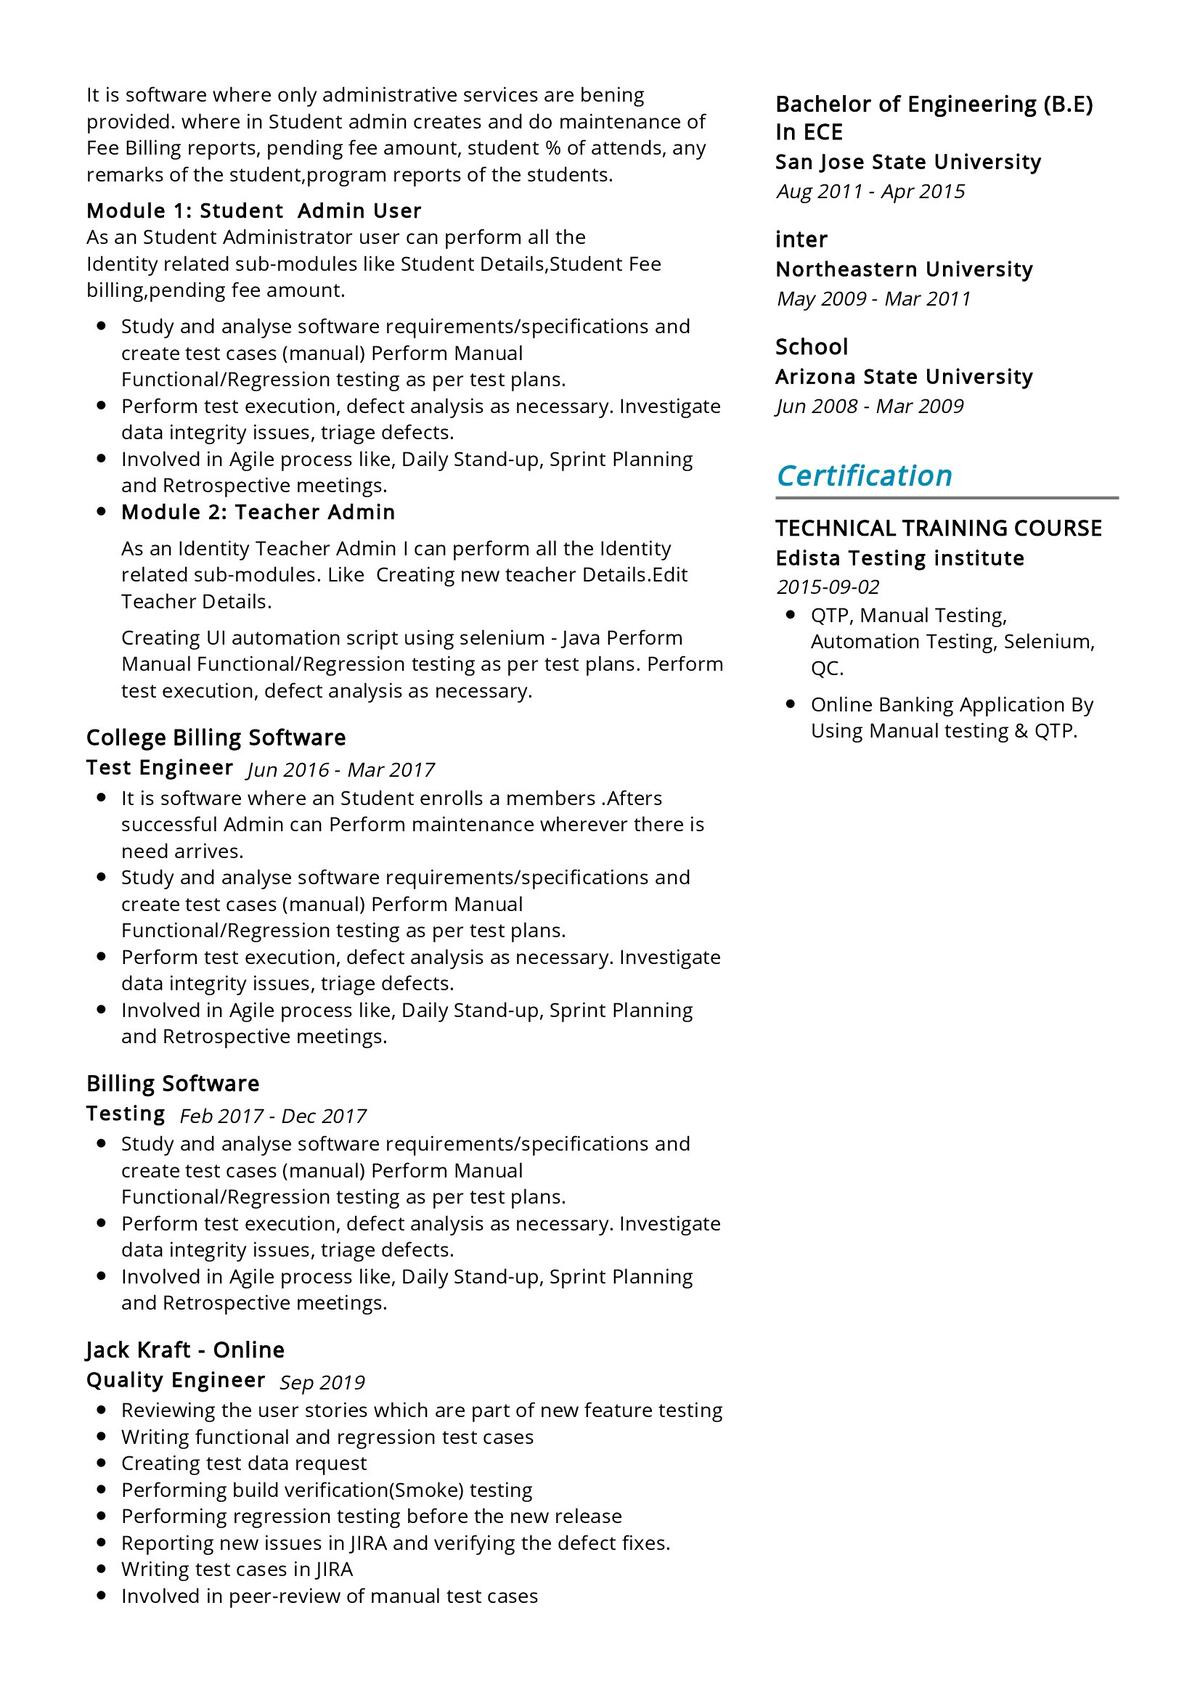 Software Testing Resume Samples for 4 Years Experience software Testing Resume Sample 2021 Writing Guide & Tips …